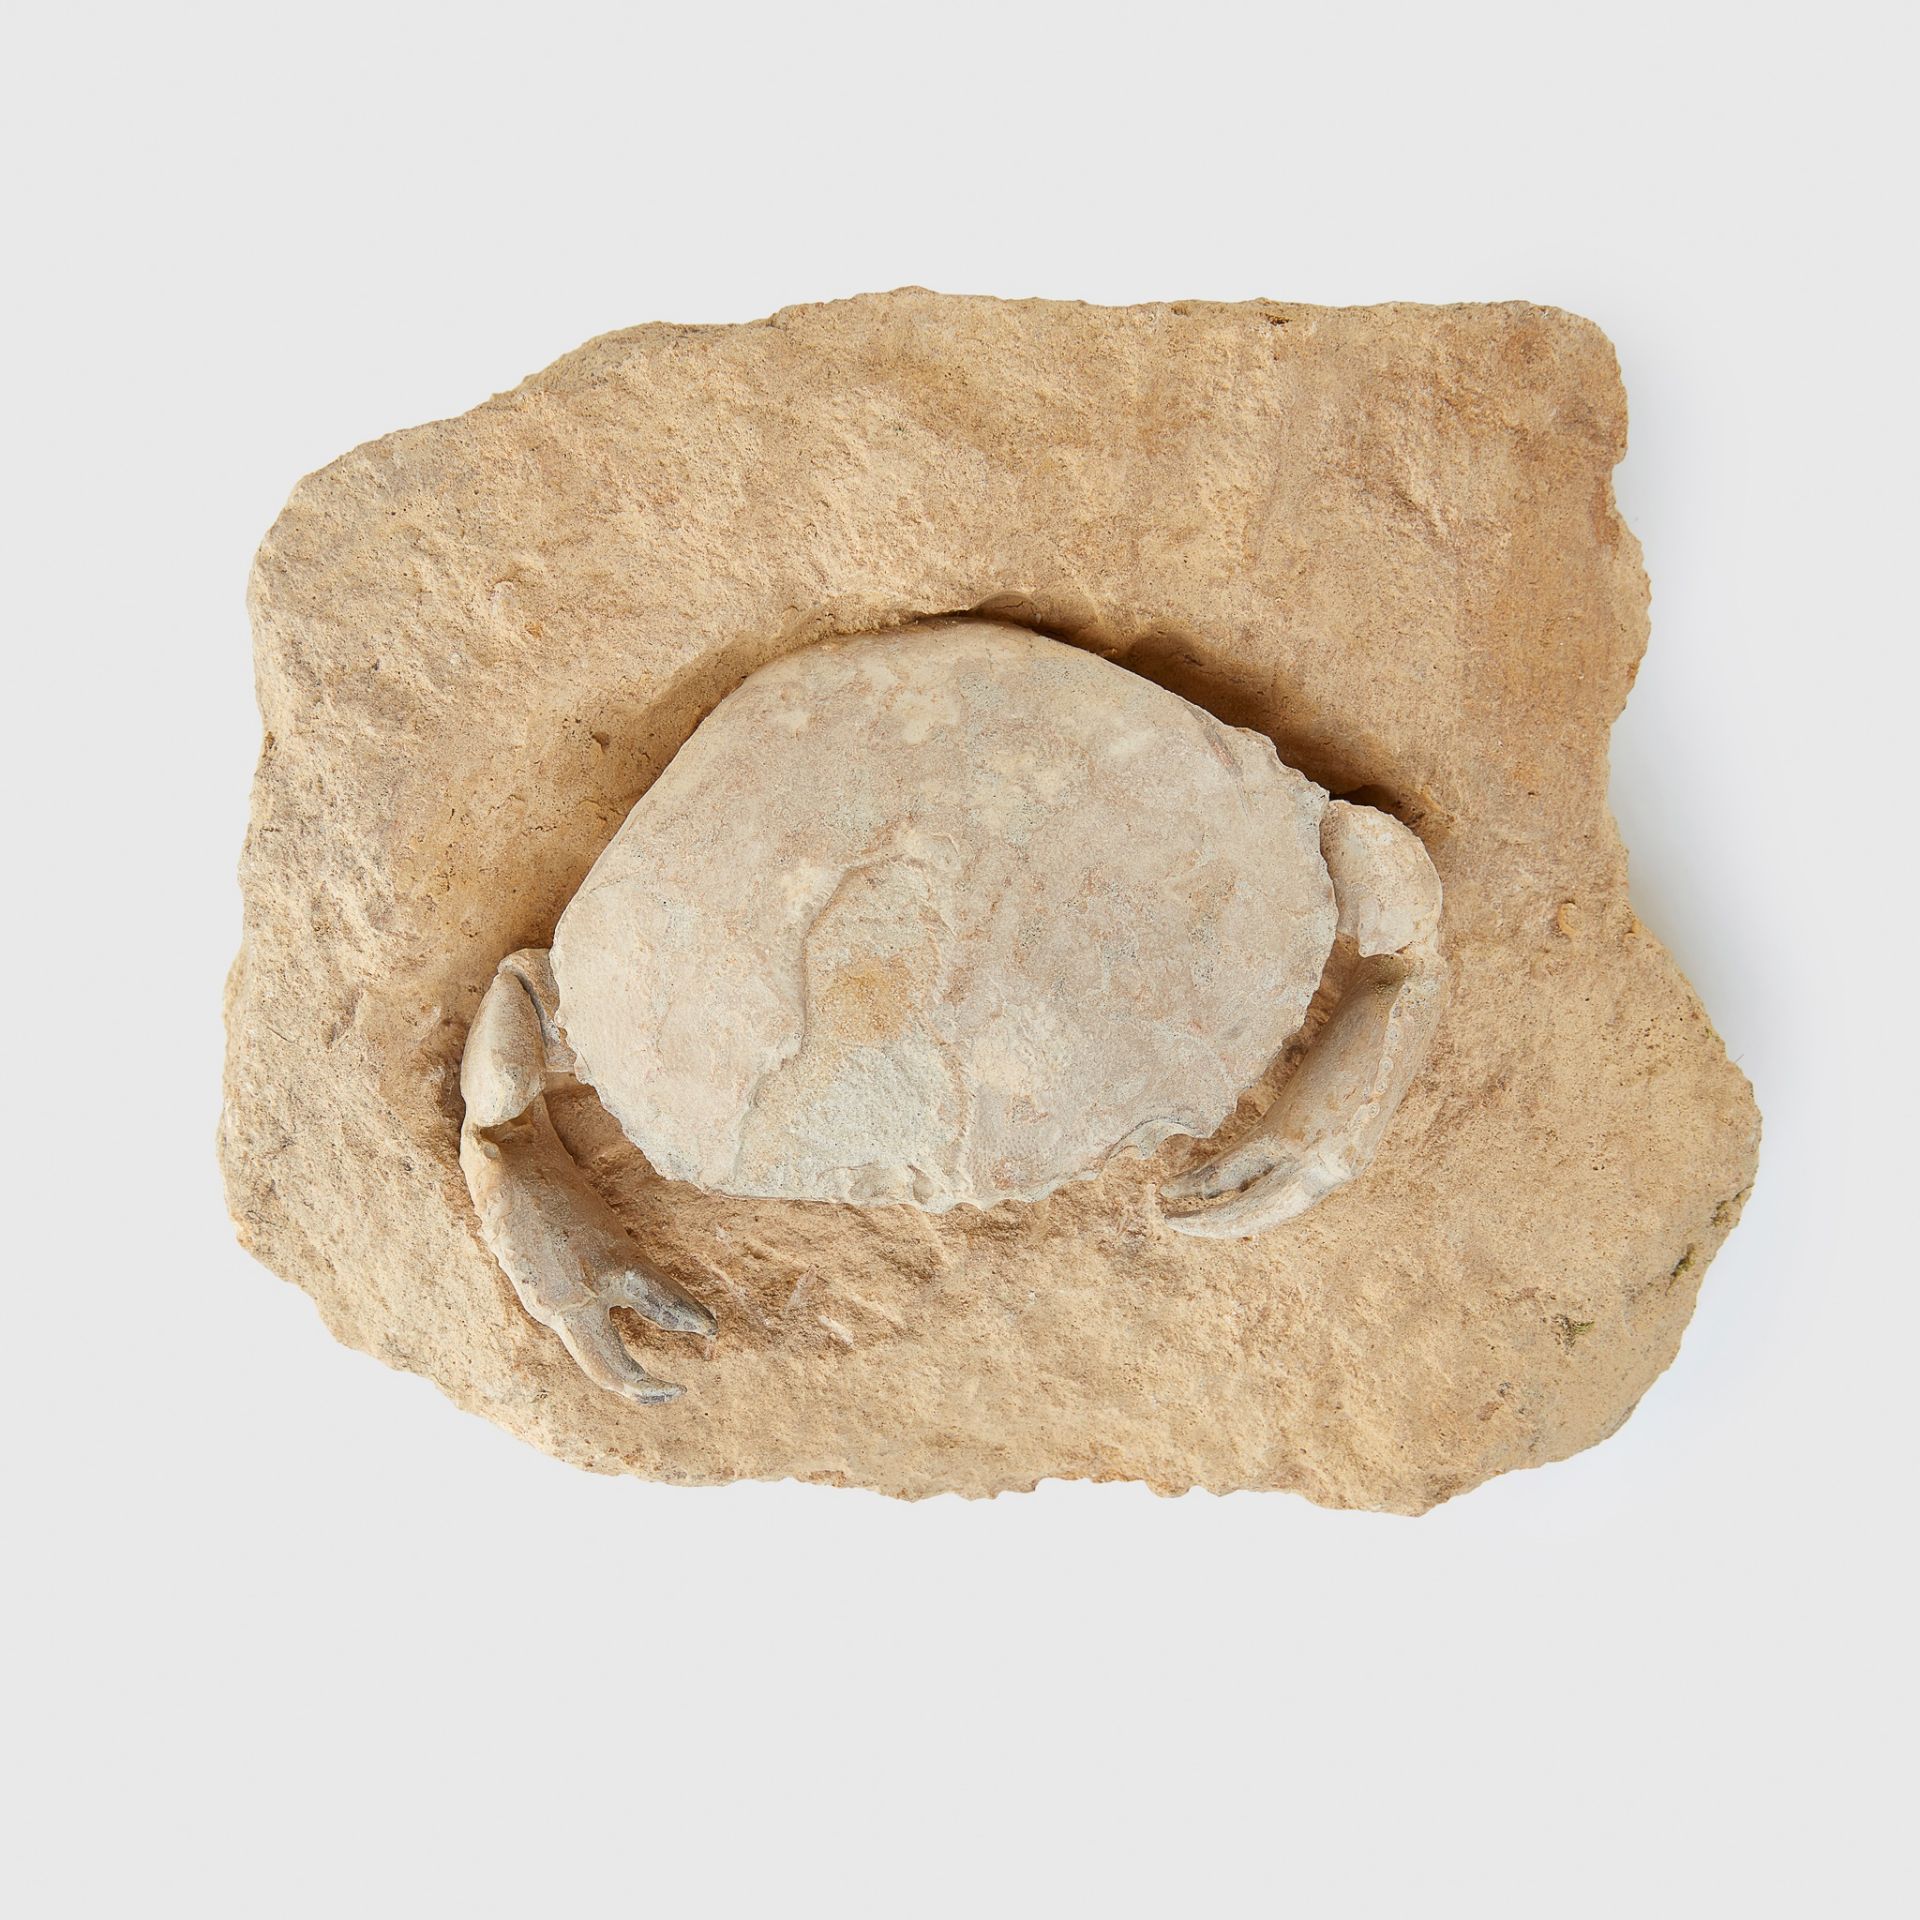 ARCHAEOGERYON CRAB FOSSIL ARGENTINA, MIOCENE PERIOD, 20 MILLION YEARS B.P. - Image 2 of 3